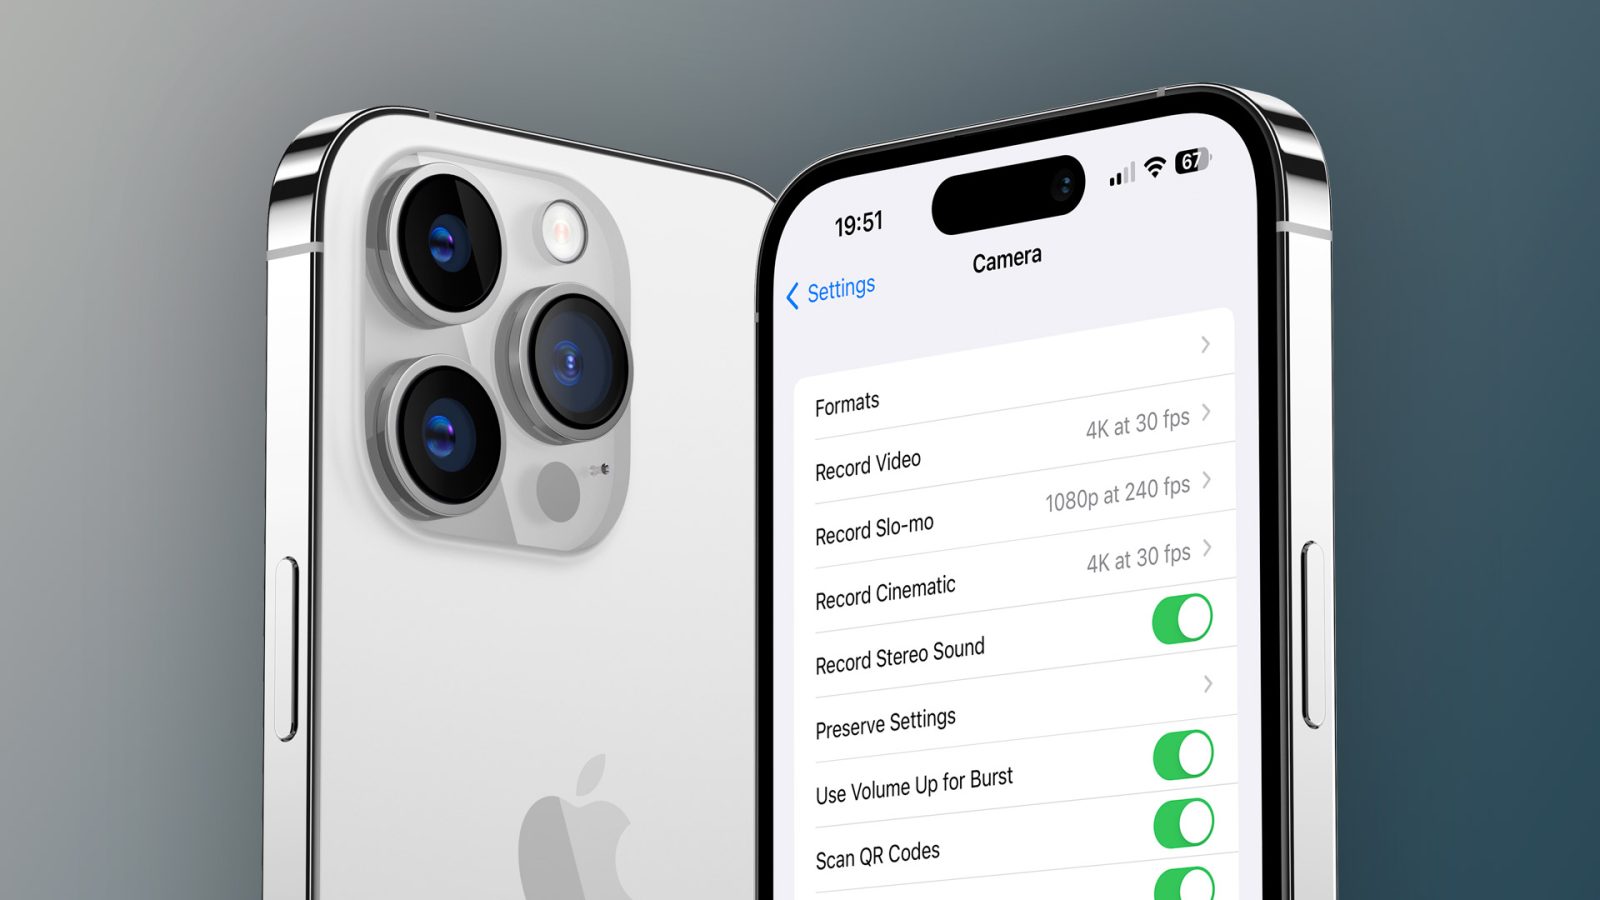 Change these camera settings on your iPhone to take better photos and videos